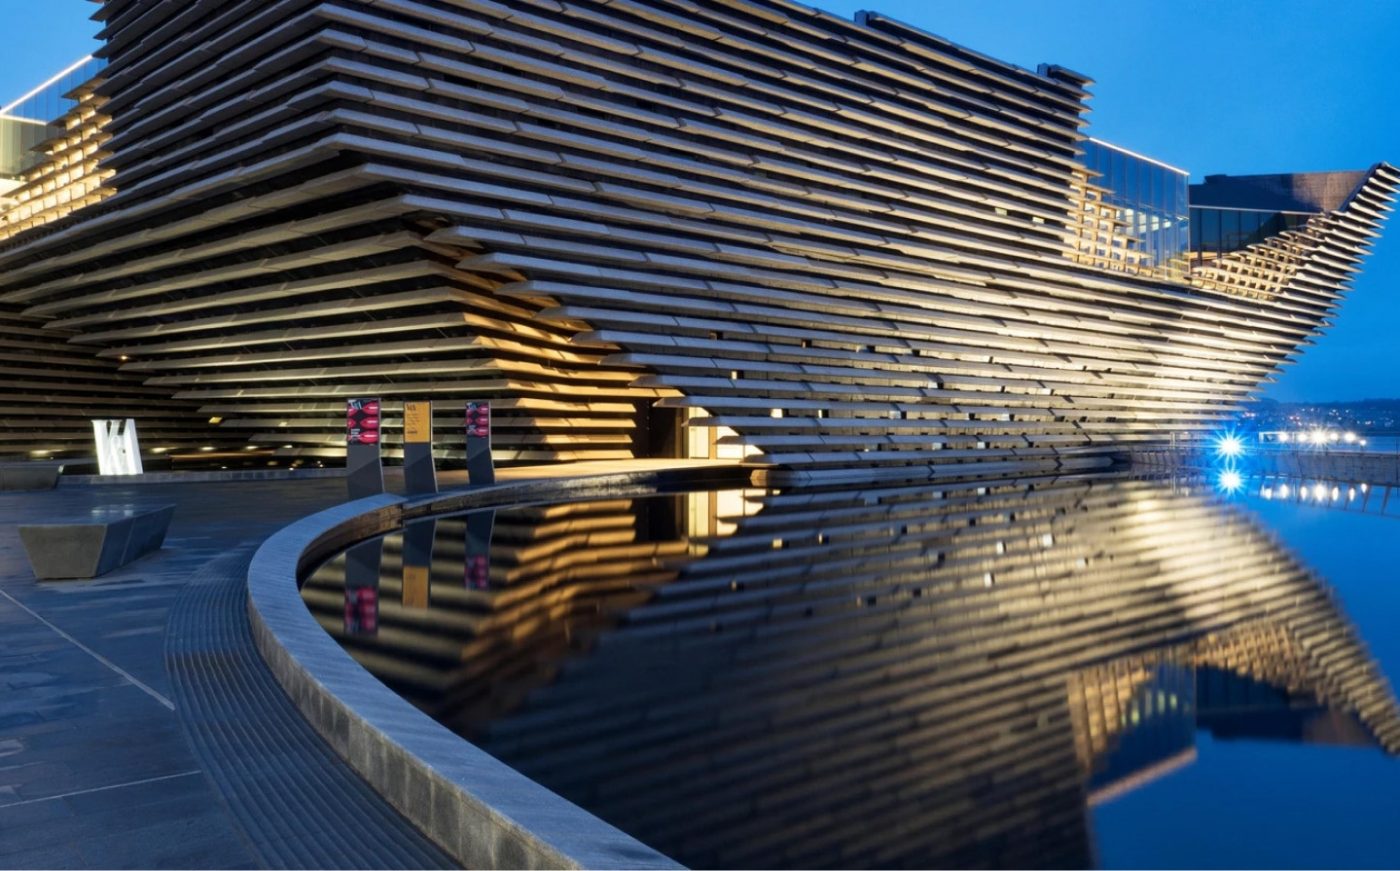 V&A in Dundee